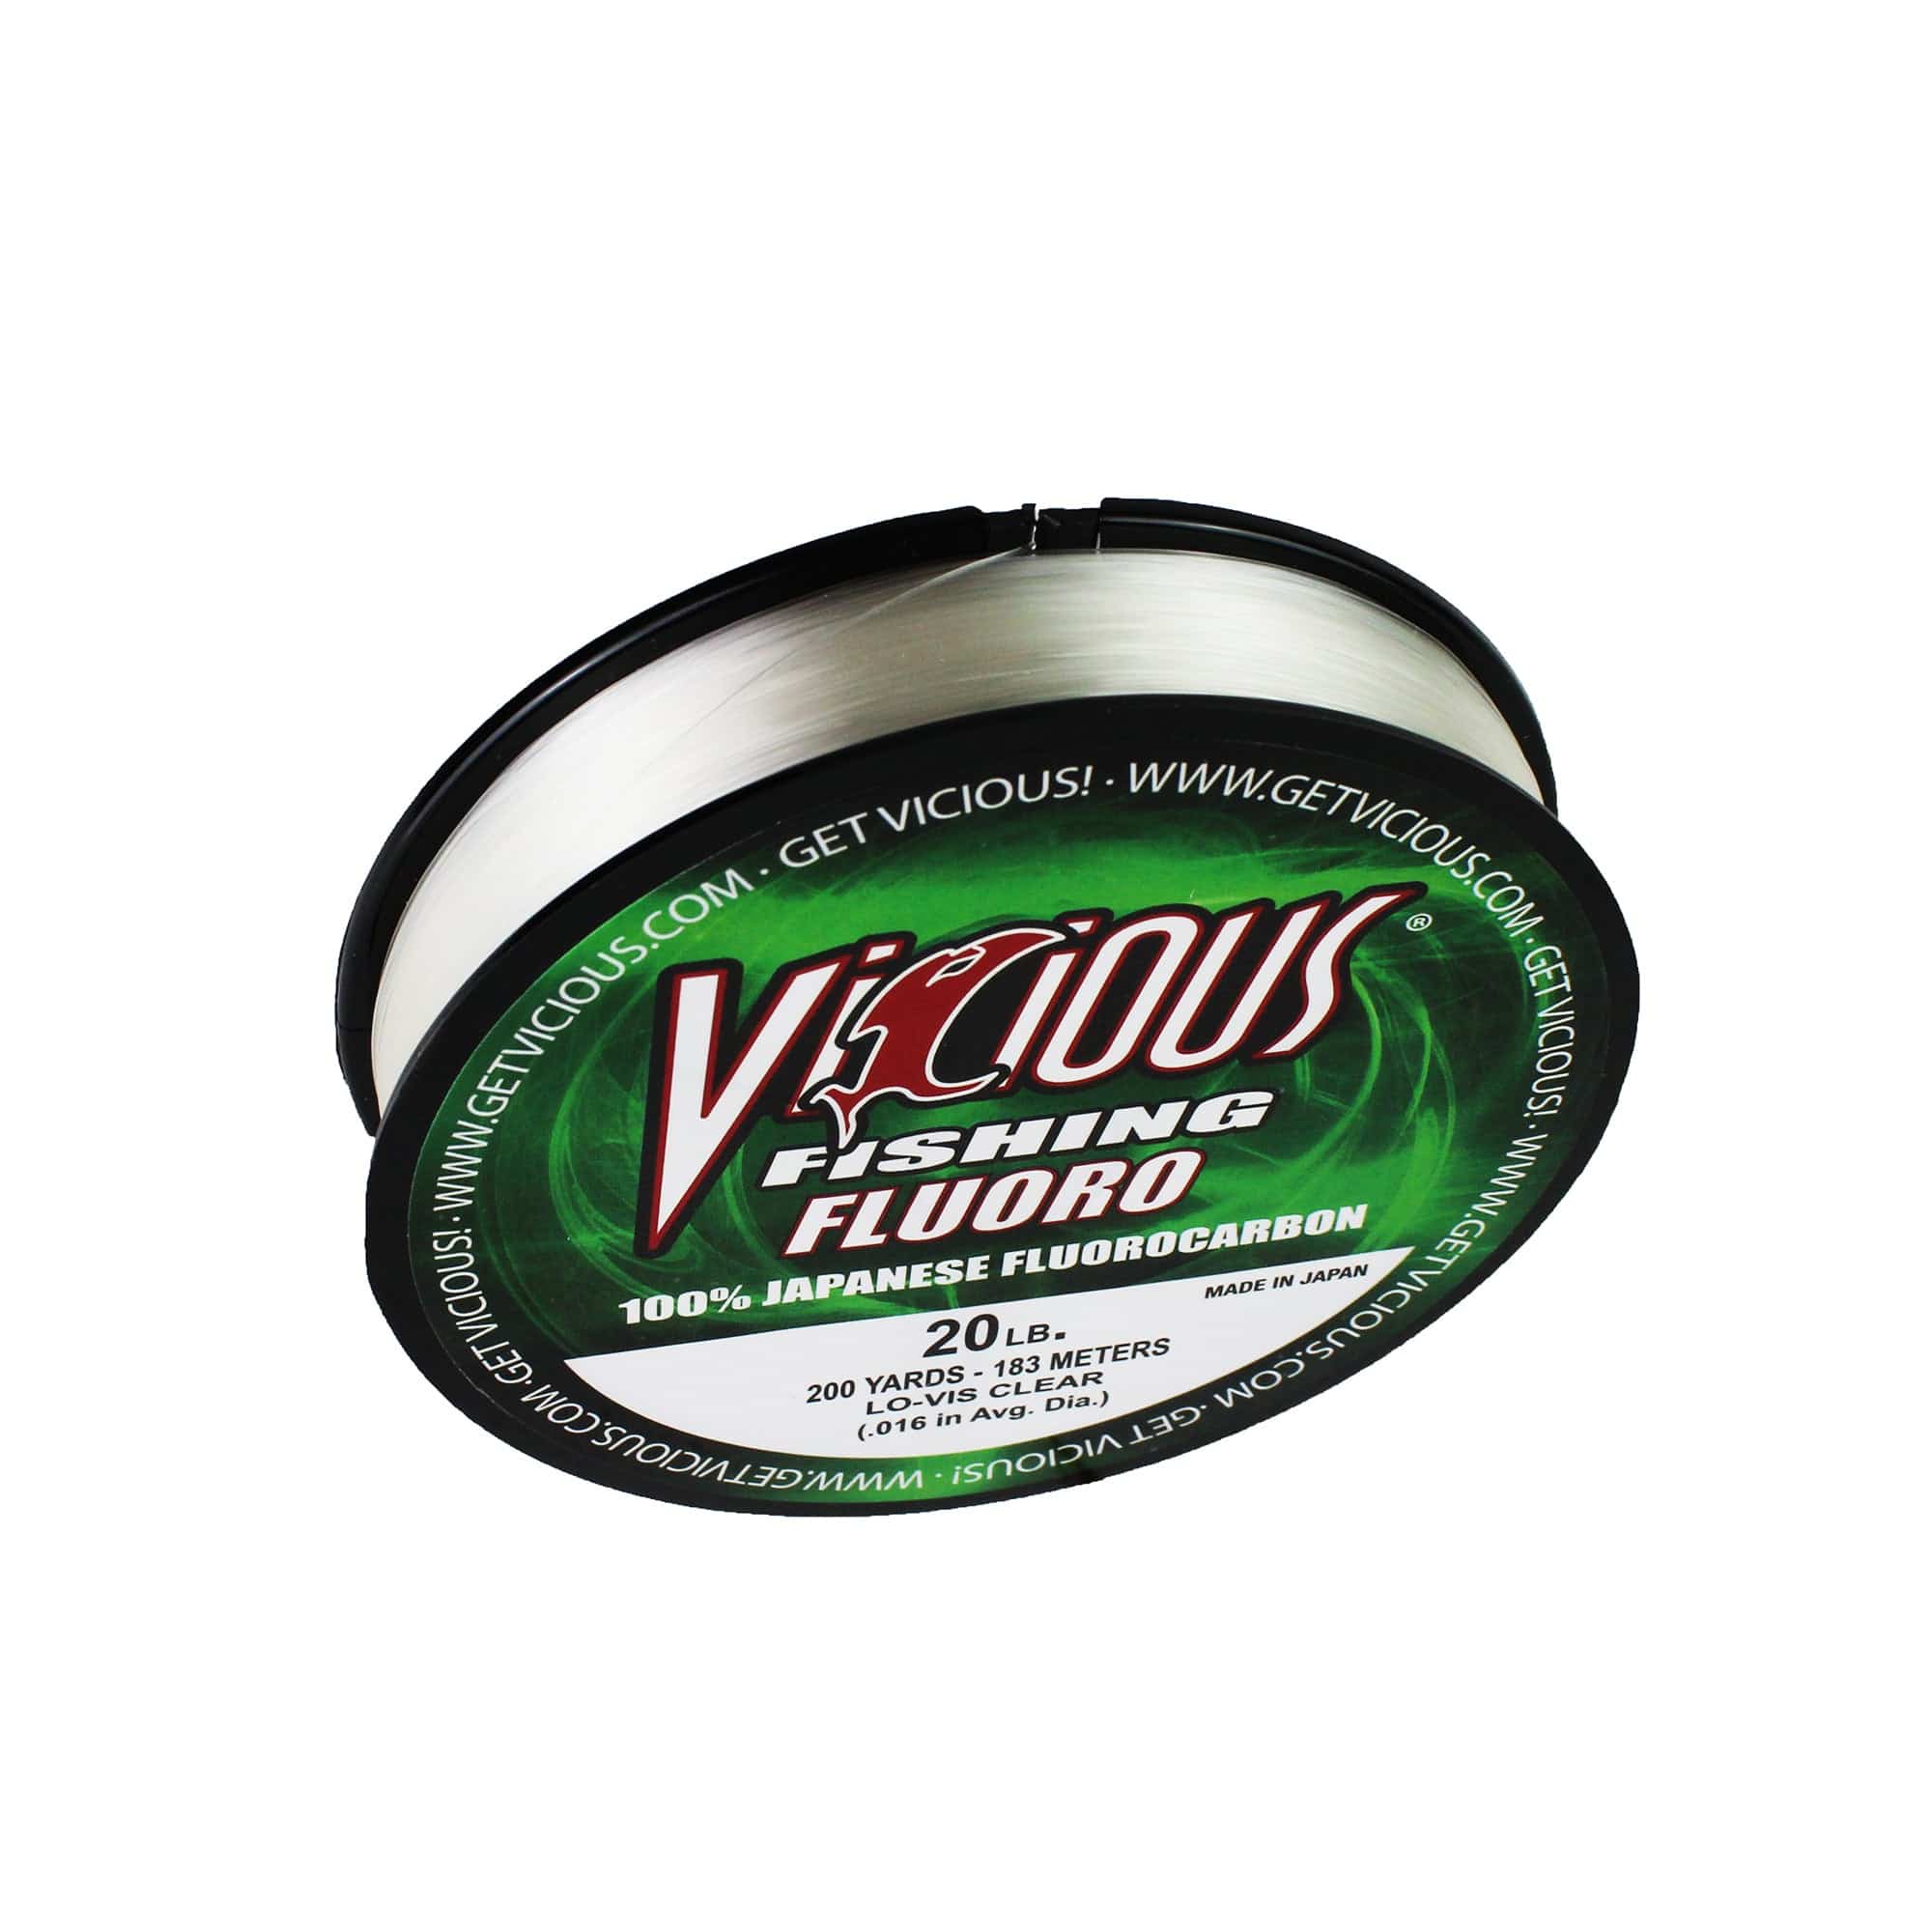 Vicious Fishing FLO Fluoro 100% Fluorocarbon Fishing Line, Clear - 200 Yards